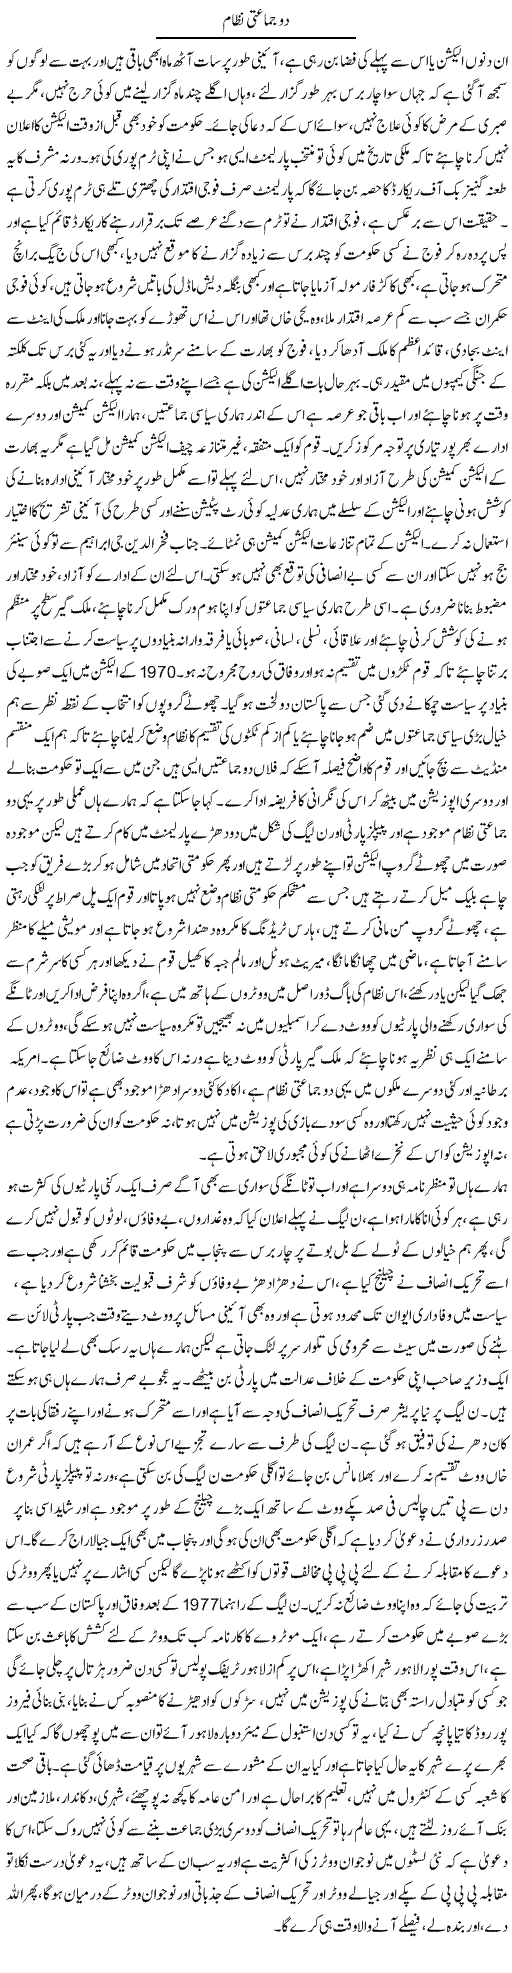 Two Party System Express Column Asadullah Ghalib 1 August 2012